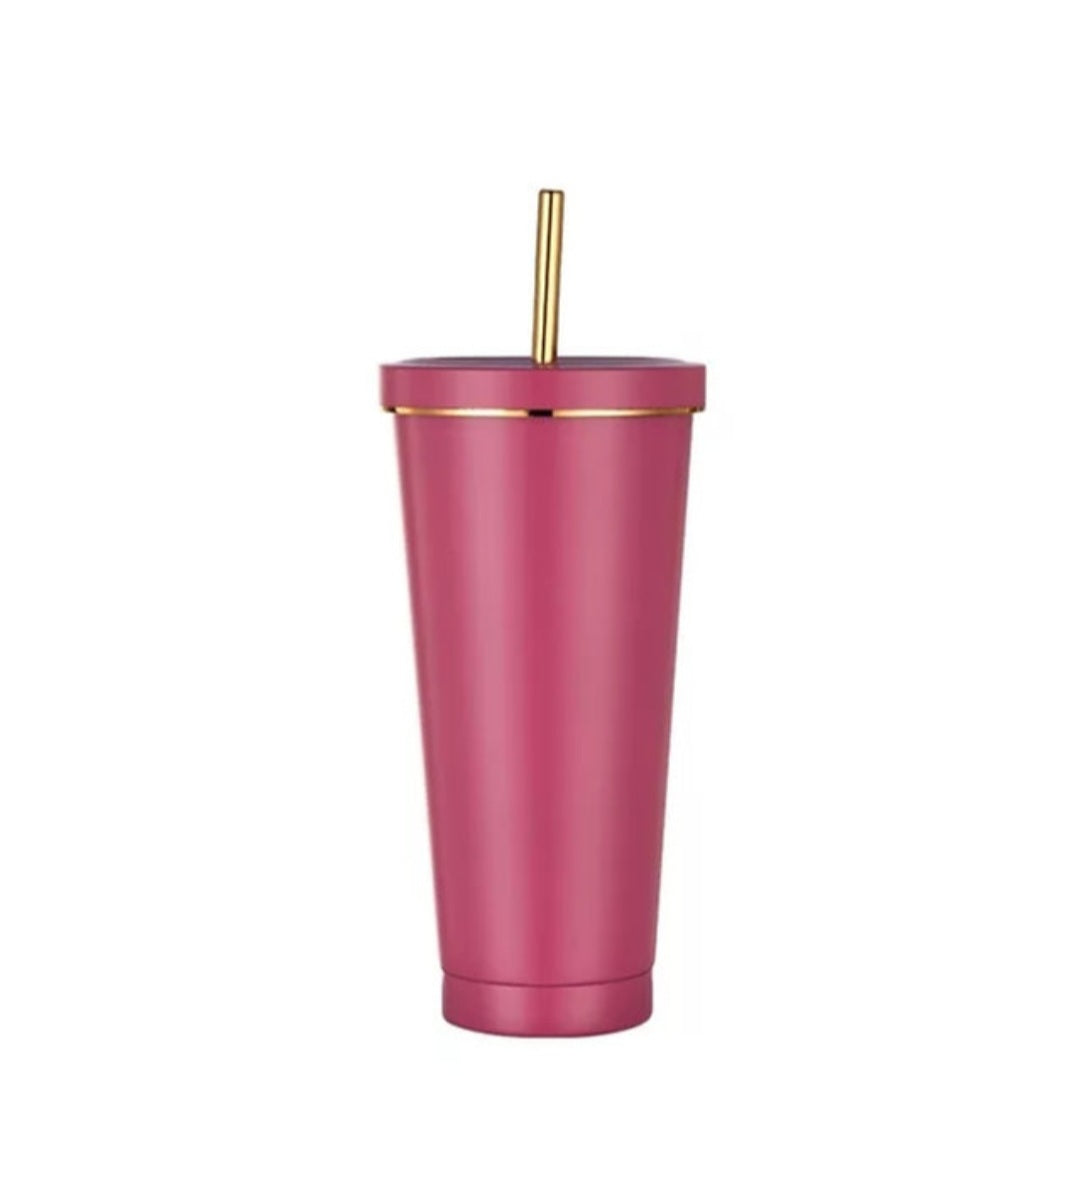 750ml/25oz Stainless Steel Travel Mug with Straw and Lid and straw cleaner